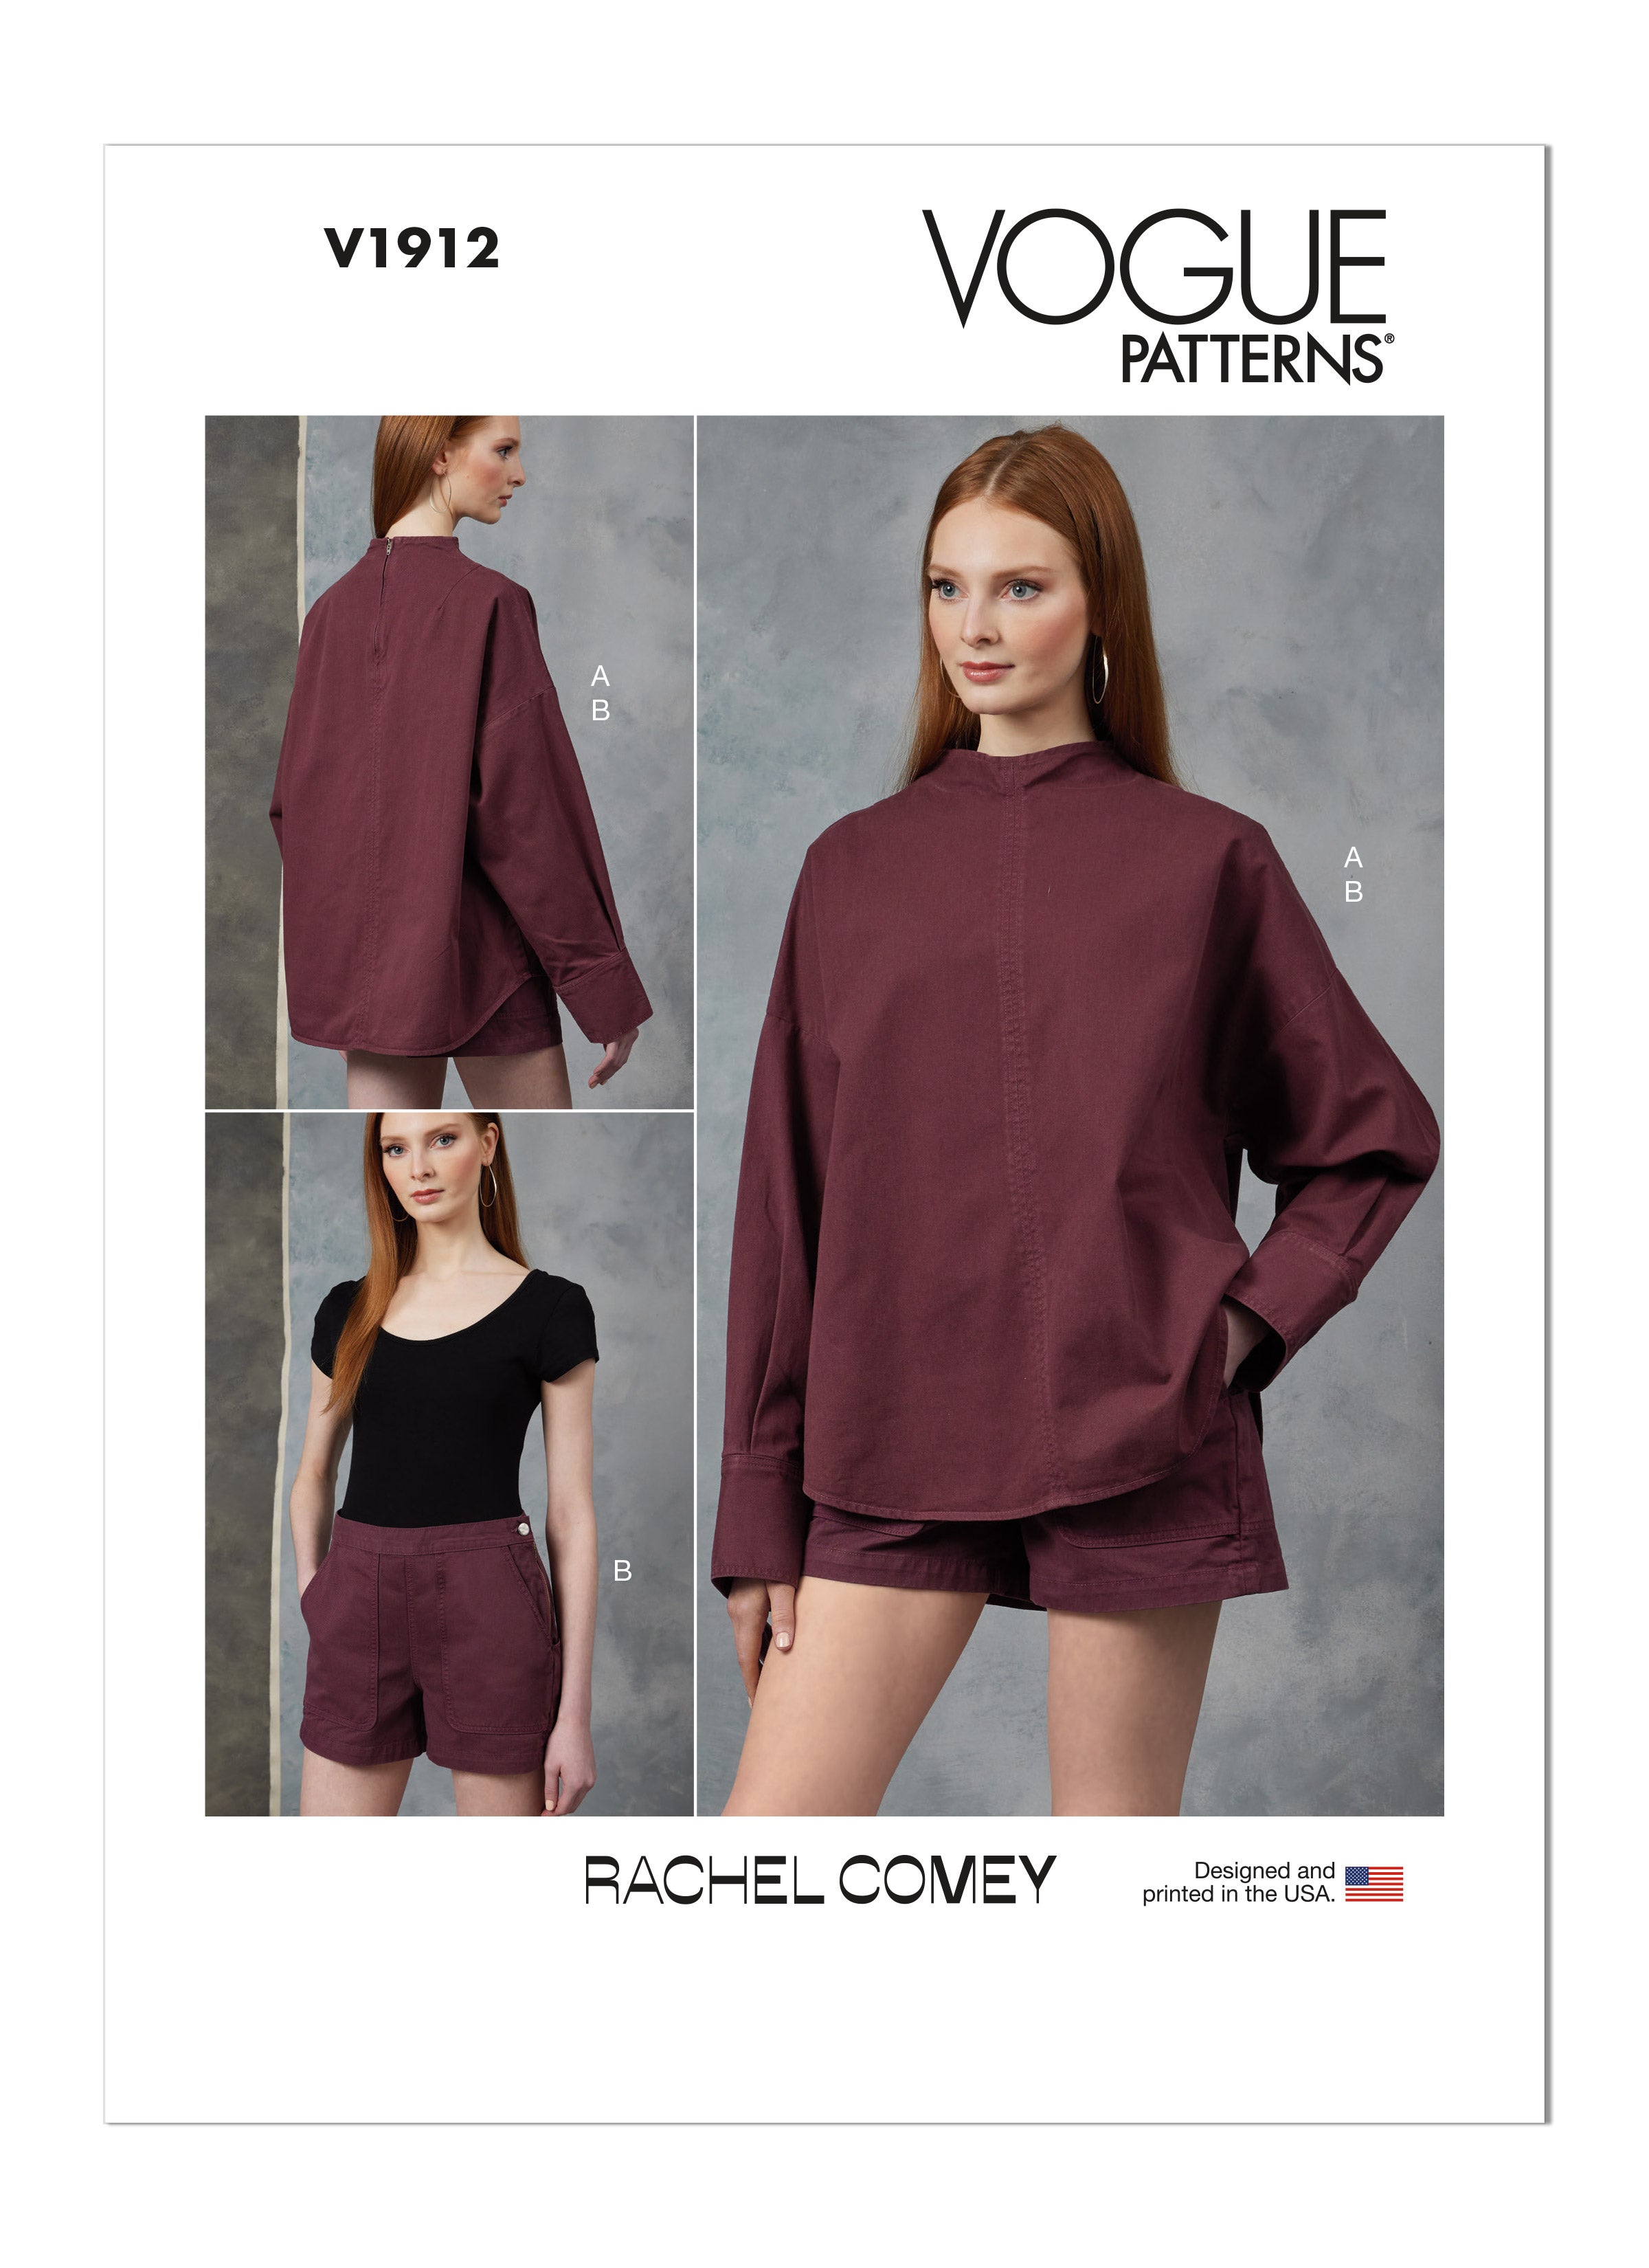 Vogue sewing pattern 1912 Misses' Top and Shorts by Rachel Comey from Jaycotts Sewing Supplies